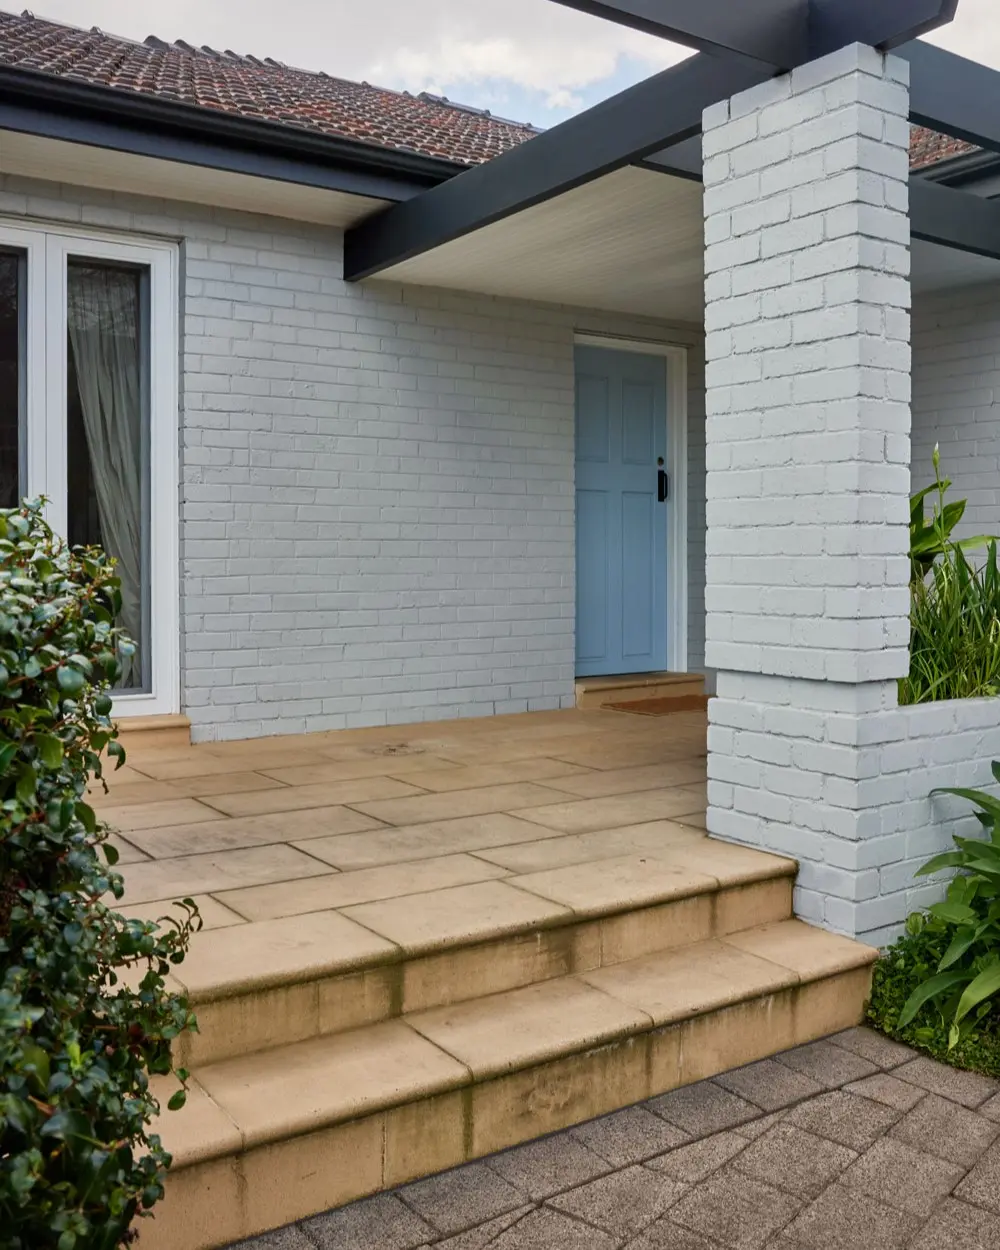 Sandstone pavers to patio entry of a white brick house.